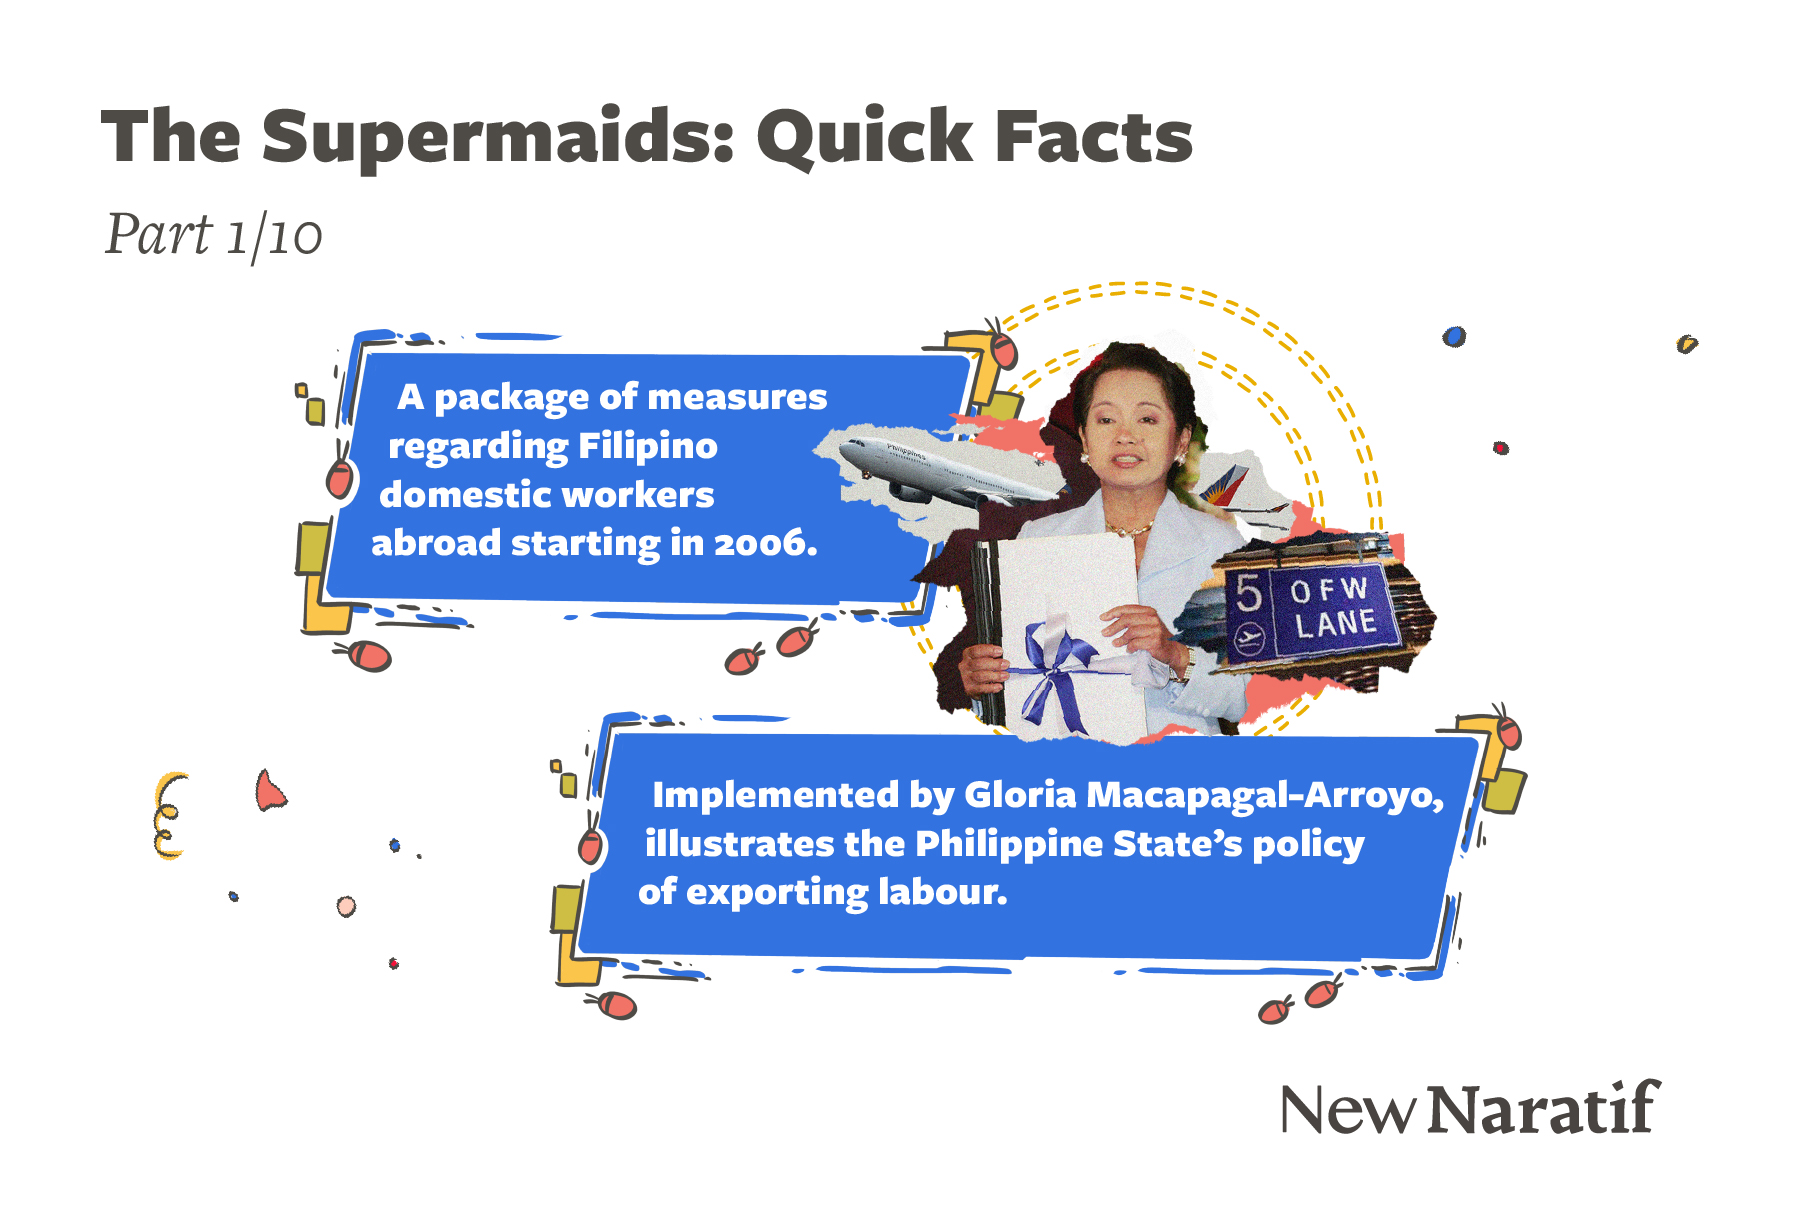 A package of measures regarding Filipino domestic workers abroad starting in 2006. Implemented by Gloria Macapagal-Arroyo, illustrates the Philippine State’s policy of exporting labour.